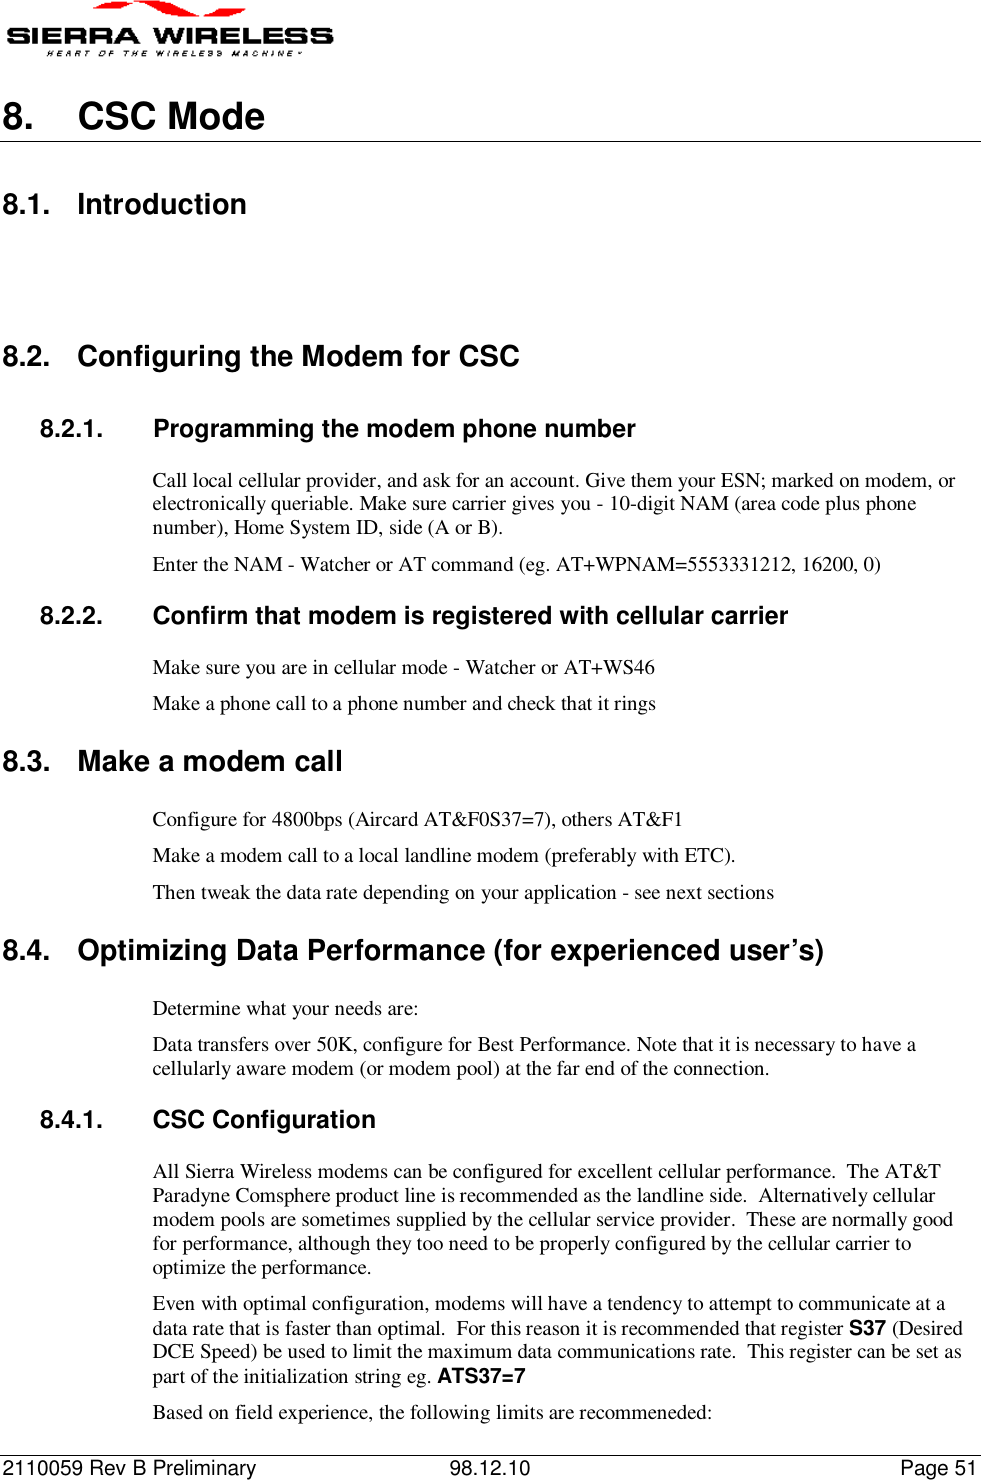 2110059 Rev B Preliminary 98.12.10 Page 518.  CSC Mode8.1. Introduction8.2.  Configuring the Modem for CSC8.2.1.  Programming the modem phone numberCall local cellular provider, and ask for an account. Give them your ESN; marked on modem, orelectronically queriable. Make sure carrier gives you - 10-digit NAM (area code plus phonenumber), Home System ID, side (A or B).Enter the NAM - Watcher or AT command (eg. AT+WPNAM=5553331212, 16200, 0)8.2.2.  Confirm that modem is registered with cellular carrierMake sure you are in cellular mode - Watcher or AT+WS46Make a phone call to a phone number and check that it rings8.3.  Make a modem callConfigure for 4800bps (Aircard AT&amp;F0S37=7), others AT&amp;F1Make a modem call to a local landline modem (preferably with ETC).Then tweak the data rate depending on your application - see next sections8.4.  Optimizing Data Performance (for experienced user’s)Determine what your needs are:Data transfers over 50K, configure for Best Performance. Note that it is necessary to have acellularly aware modem (or modem pool) at the far end of the connection.8.4.1.  CSC ConfigurationAll Sierra Wireless modems can be configured for excellent cellular performance.  The AT&amp;TParadyne Comsphere product line is recommended as the landline side.  Alternatively cellularmodem pools are sometimes supplied by the cellular service provider.  These are normally goodfor performance, although they too need to be properly configured by the cellular carrier tooptimize the performance.Even with optimal configuration, modems will have a tendency to attempt to communicate at adata rate that is faster than optimal.  For this reason it is recommended that register S37 (DesiredDCE Speed) be used to limit the maximum data communications rate.  This register can be set aspart of the initialization string eg. ATS37=7Based on field experience, the following limits are recommeneded: